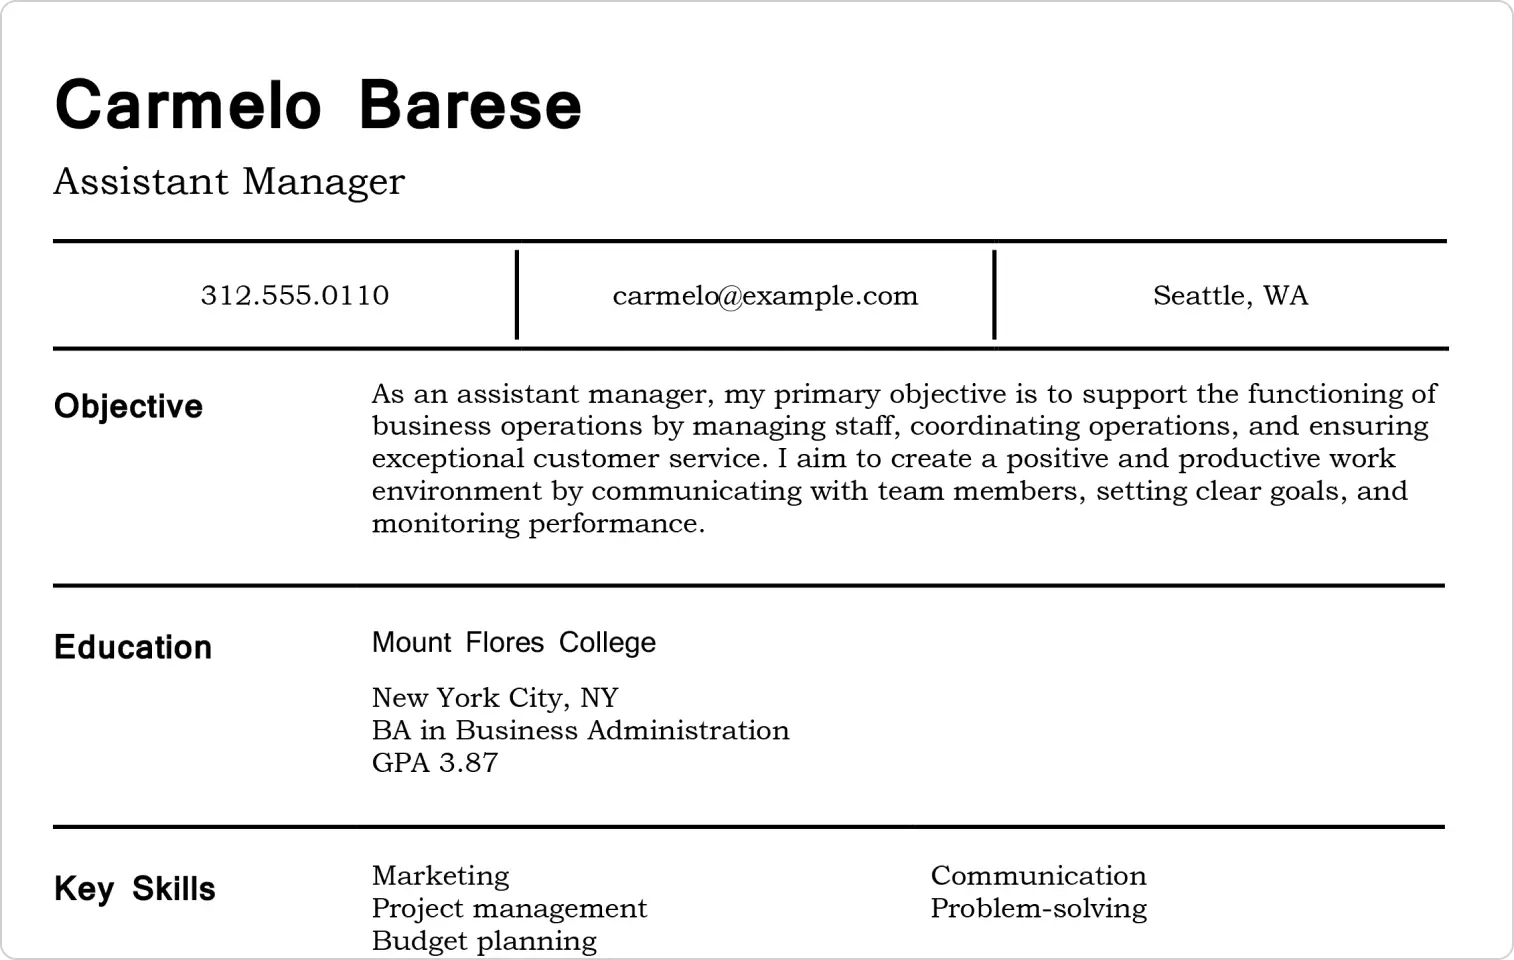 An image of a classic management resume template